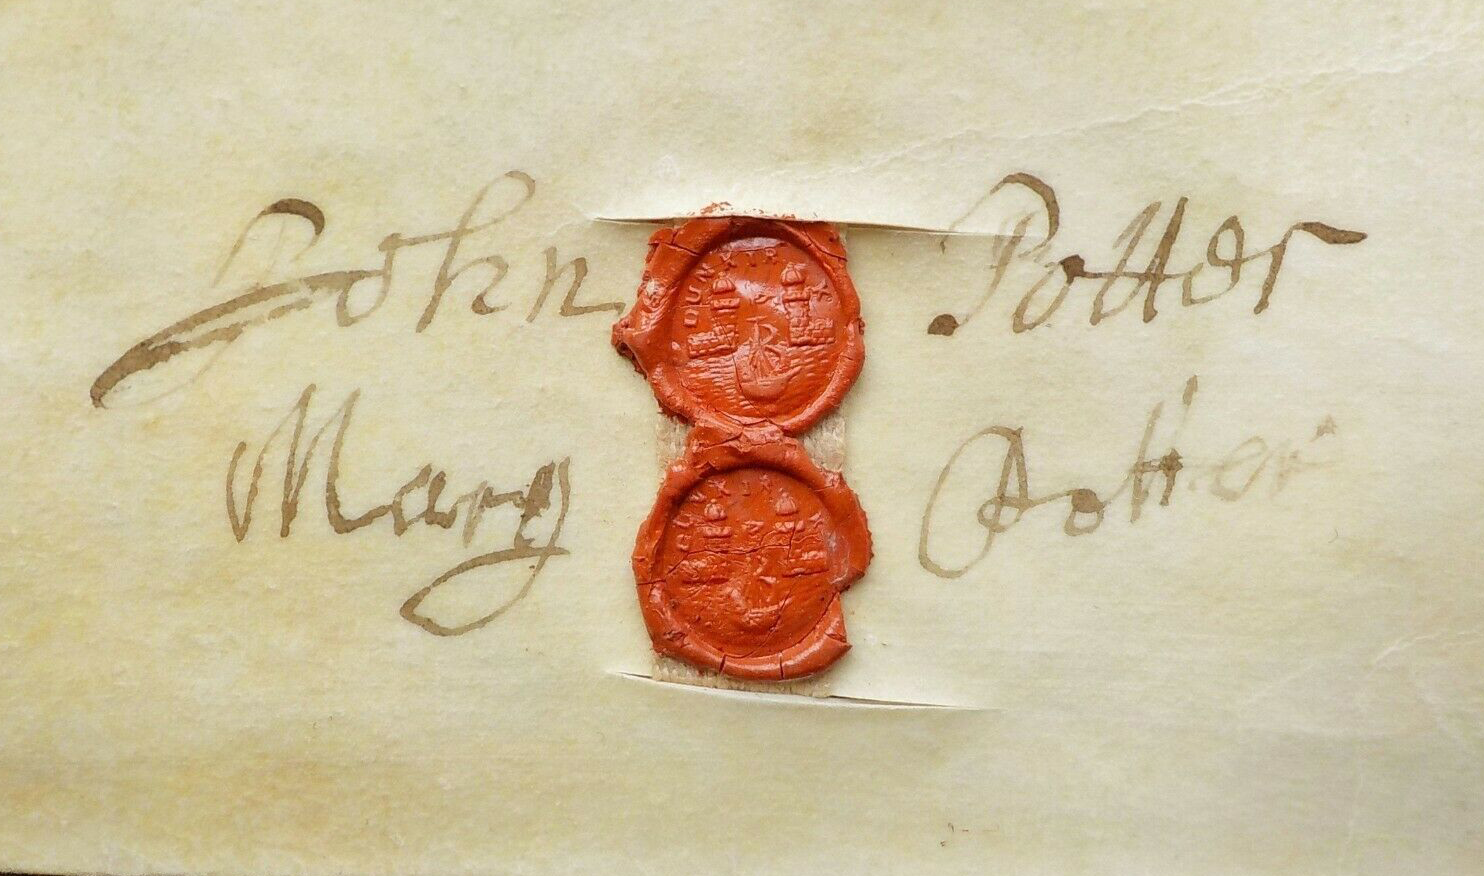  Wax Seal for John Potter and Mary Potter. The seals depict a ship and harbour surrounded by the word Dunkirk.
 From 1715 Indenture conveying property between Potter family and James Boys
</p>  MARG_277_009